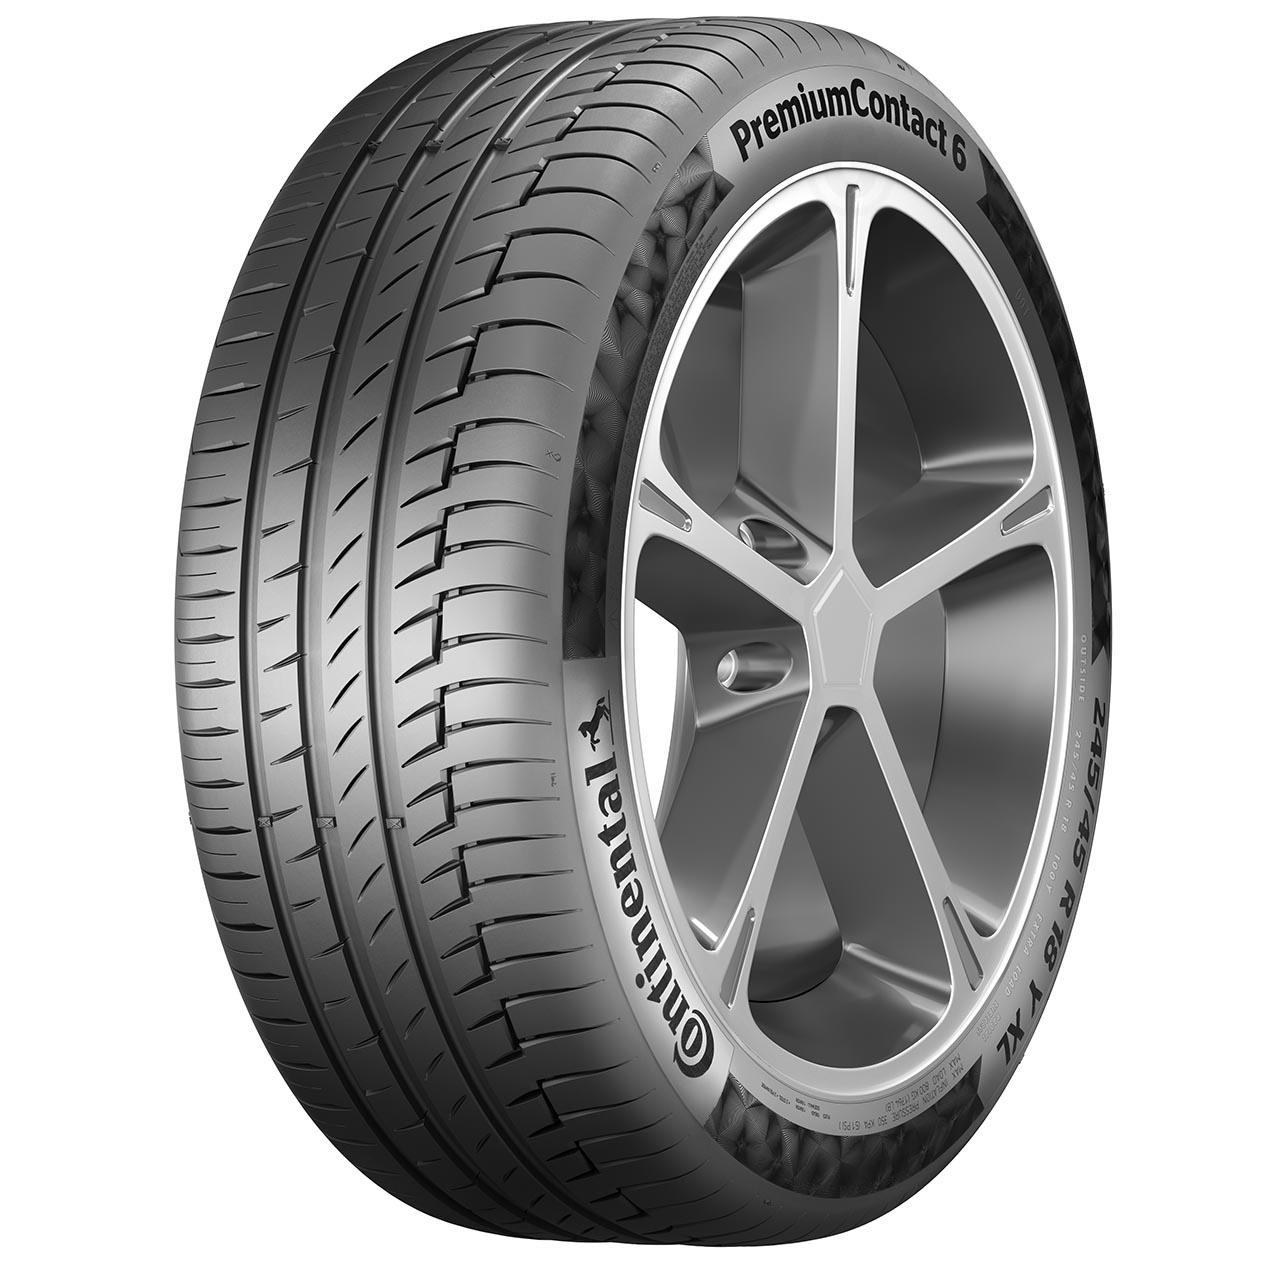 Continental PREMIUMCONTACT 6 235/60R18 103V SEAL FR FOR